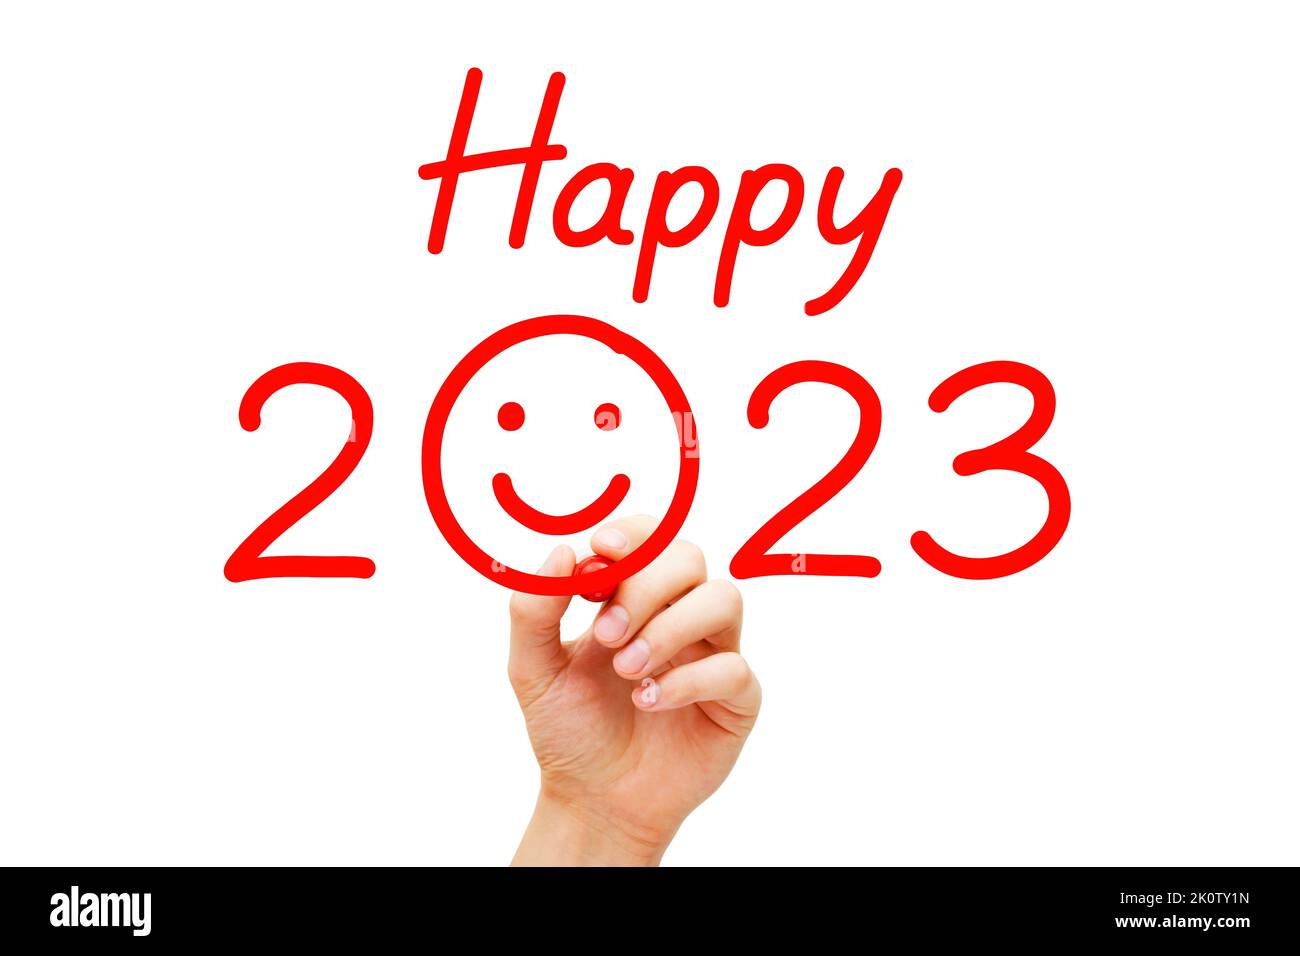 Hand drawing smiling face and writing Happy New Year 2023 with red marker. Stock Photo